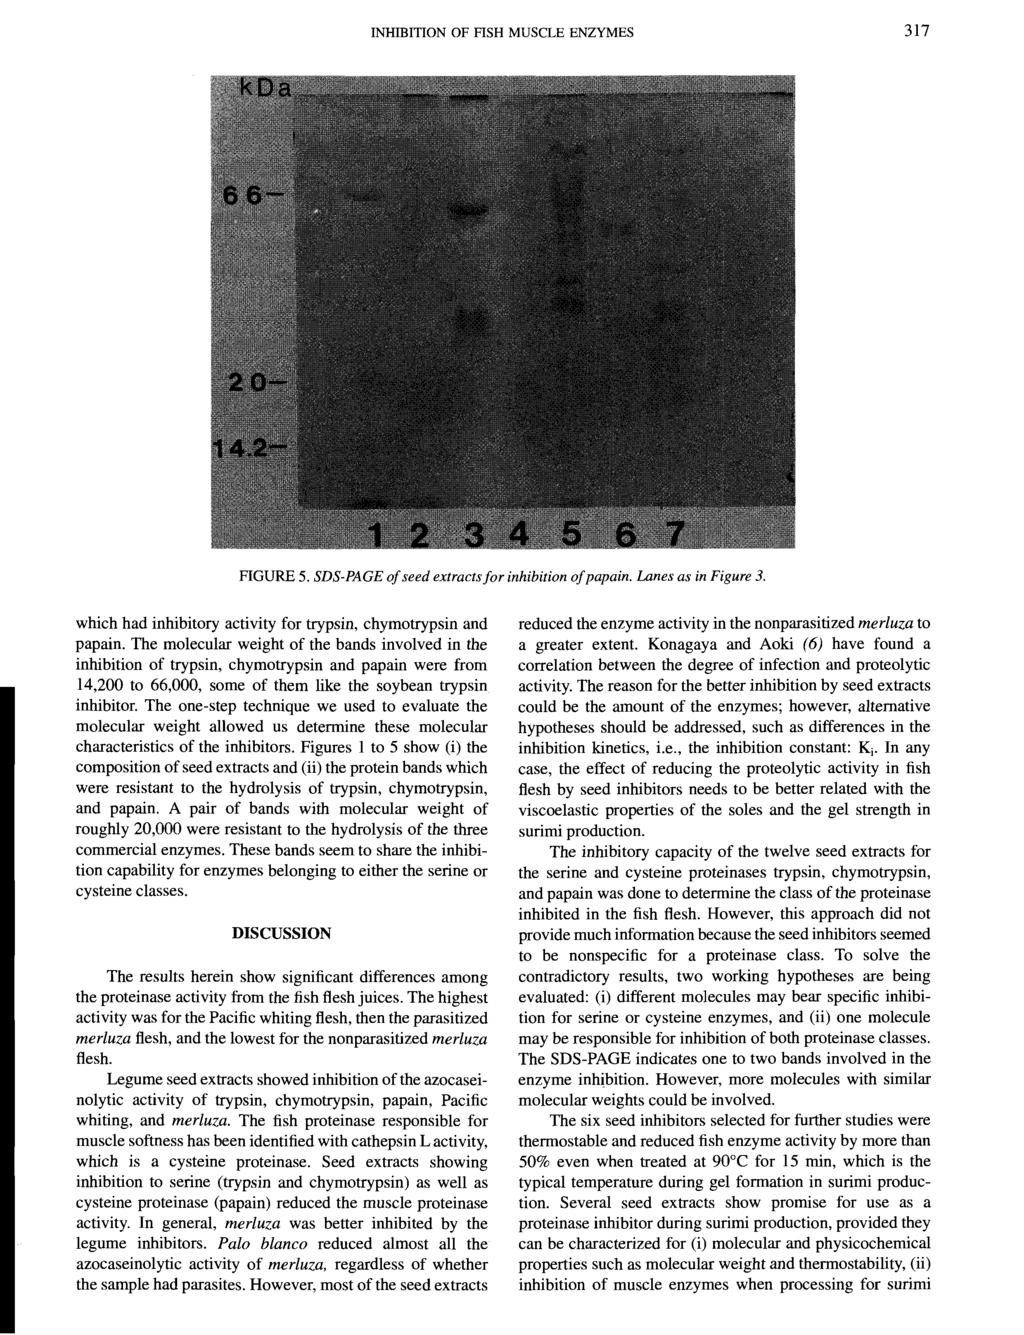 INHIBITION OF FISH MUSCLE ENZYMES 317 FIGURE 5. SDS-PAGE of seed extracts for inhibition of papain. Lanes as in Figure 3. which had inhibitory activity for trypsin, chymotrypsin and papain.